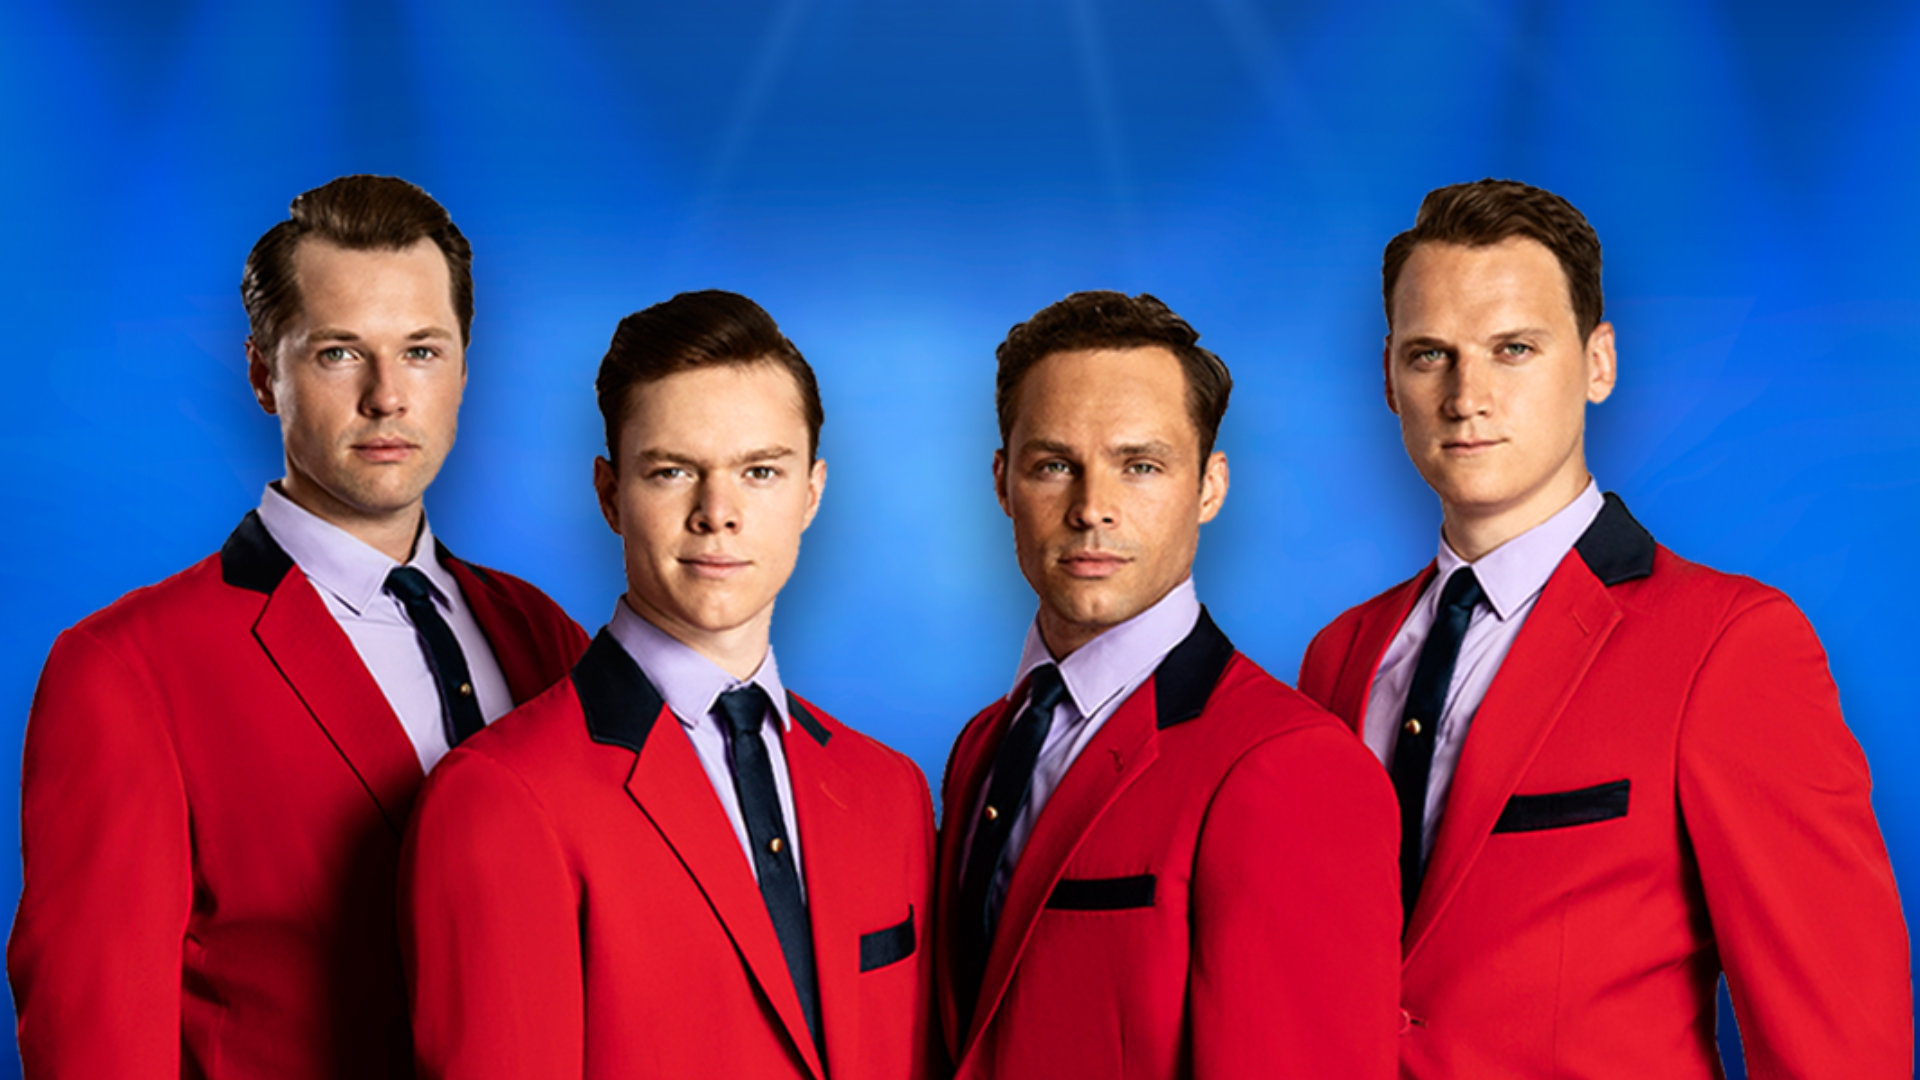 Jersey Boys West End cast announced as show returns to London Stage Chat